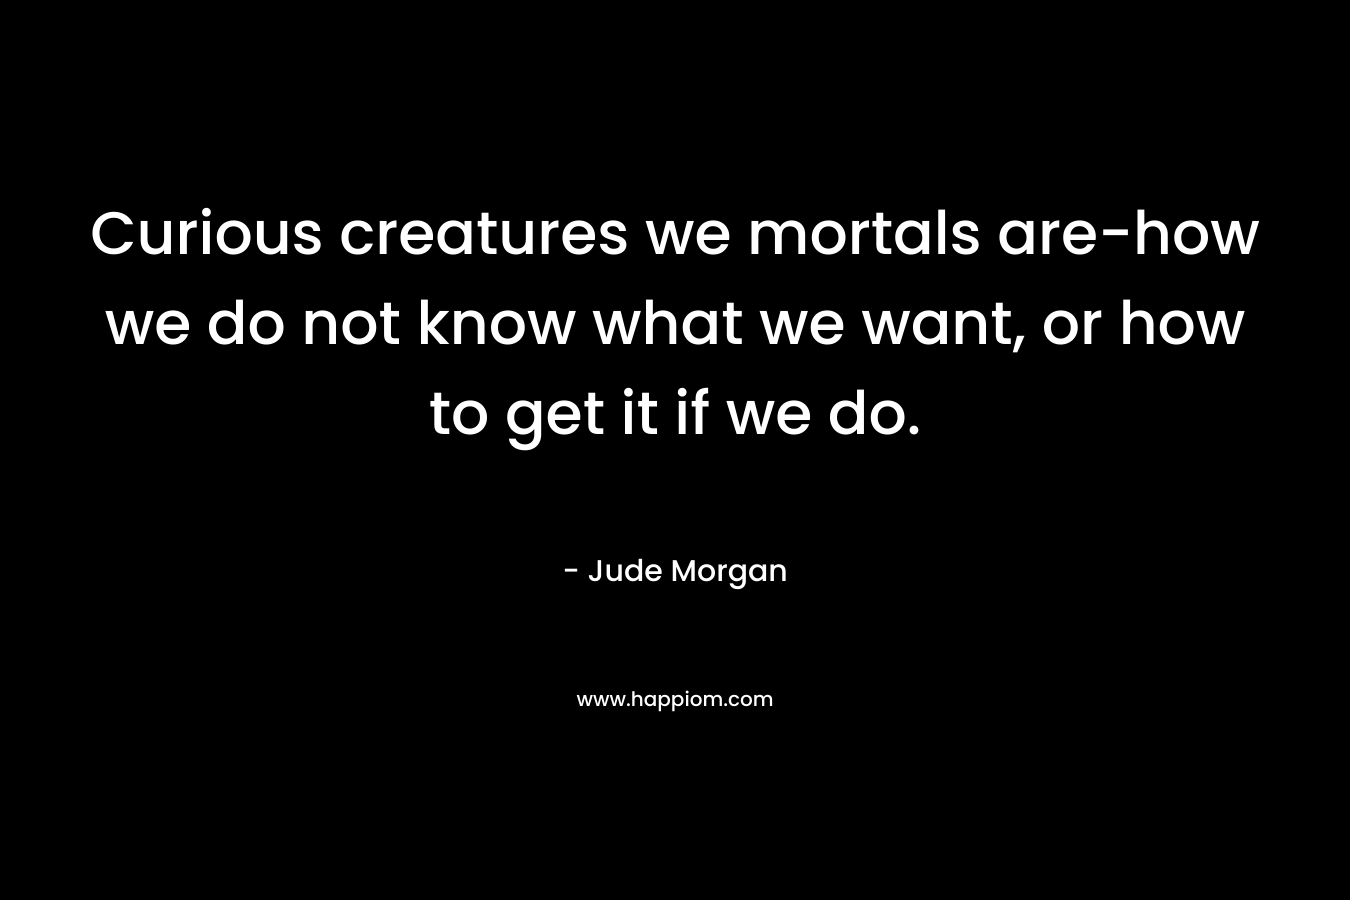 Curious creatures we mortals are-how we do not know what we want, or how to get it if we do. – Jude Morgan